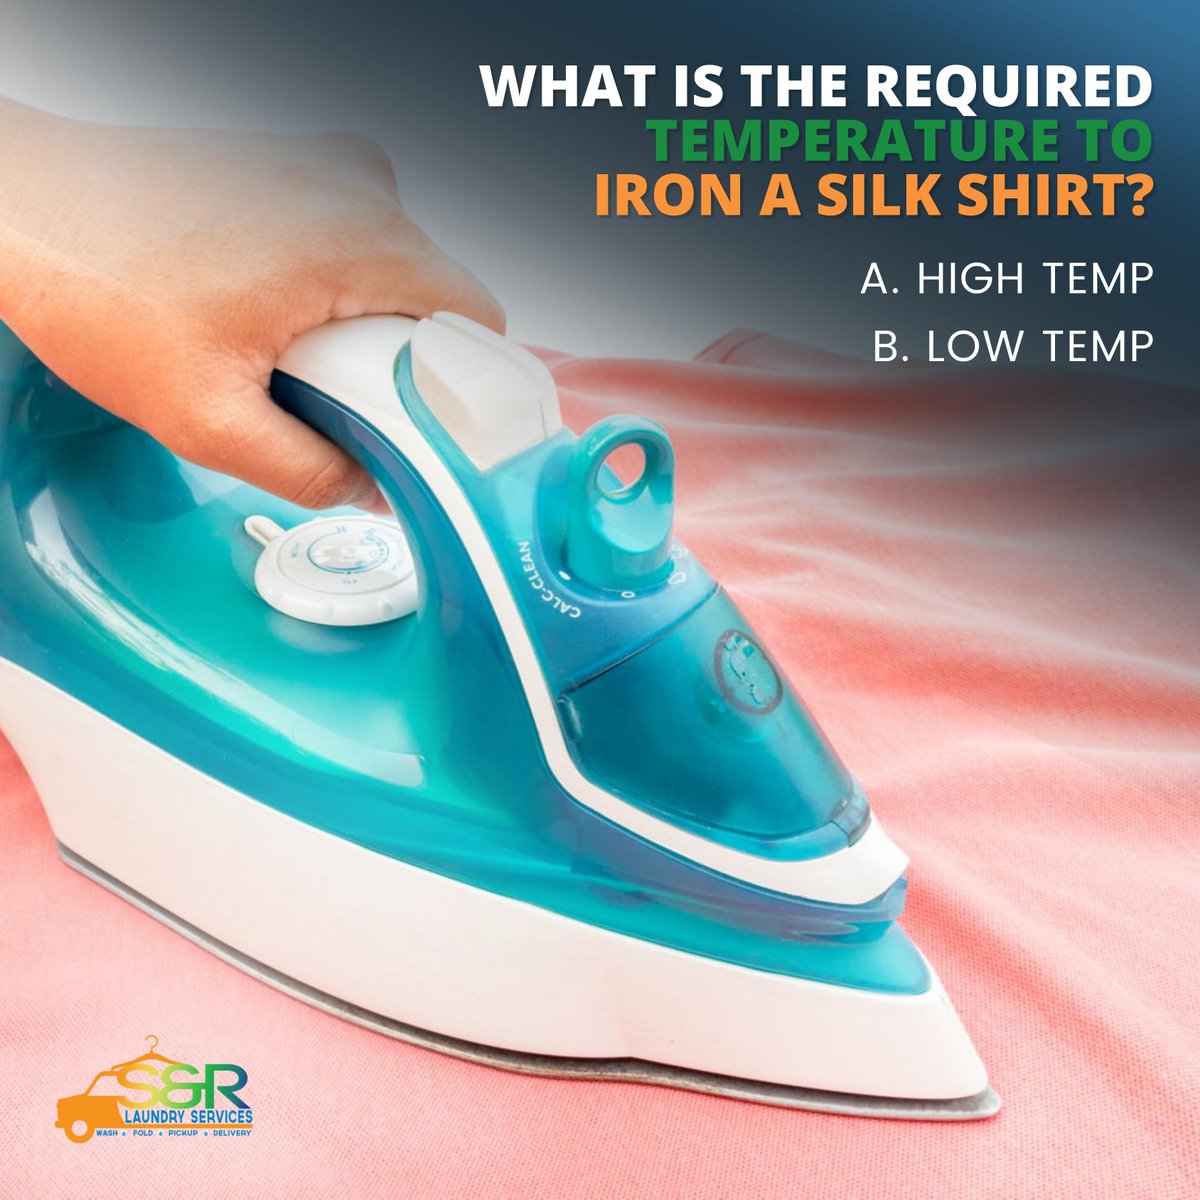 What do you think is the required temperature to iron a silk shirt?
Are you Team A or Team B?
----
🌐 cleanmylaundry.com
.
#cleanmylaundry #LaundryServices #laundry #silk #shirt #ironing #requiredtemperature #iron #silkshirt #hightemp #lowtemp